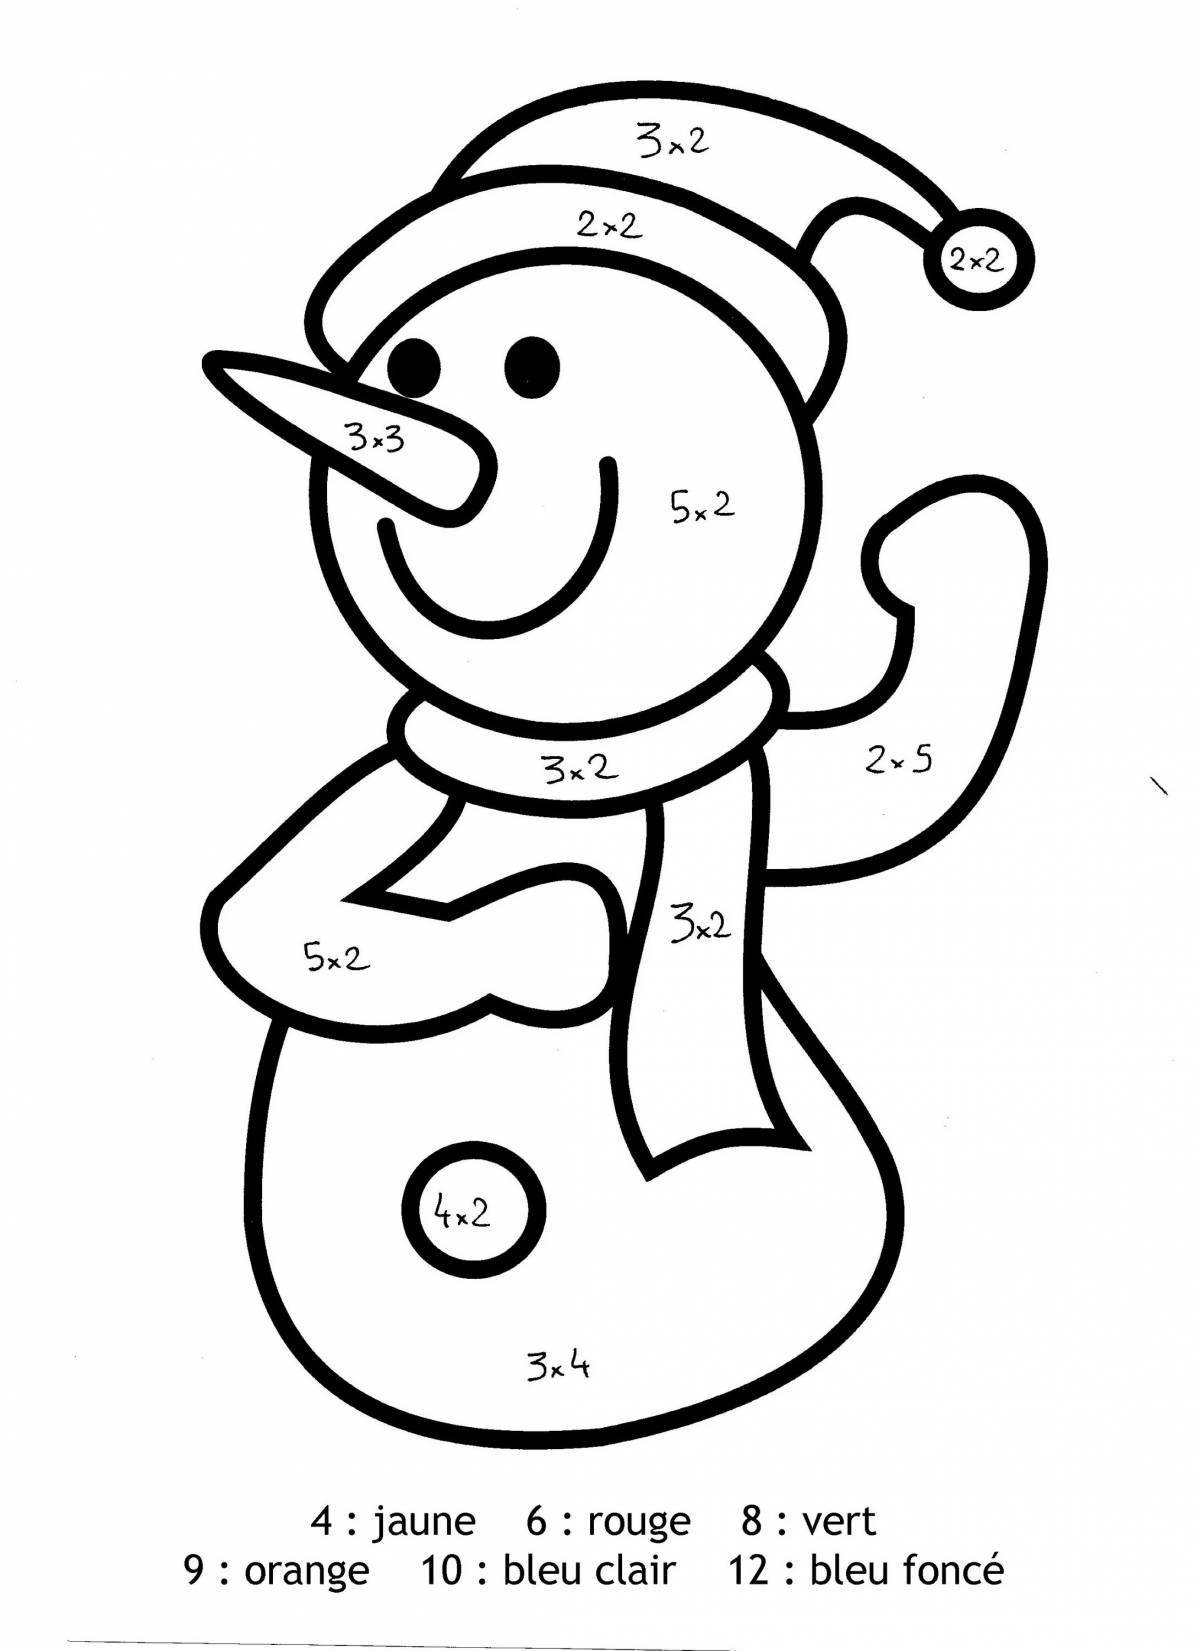 Glamorous snowman coloring by numbers